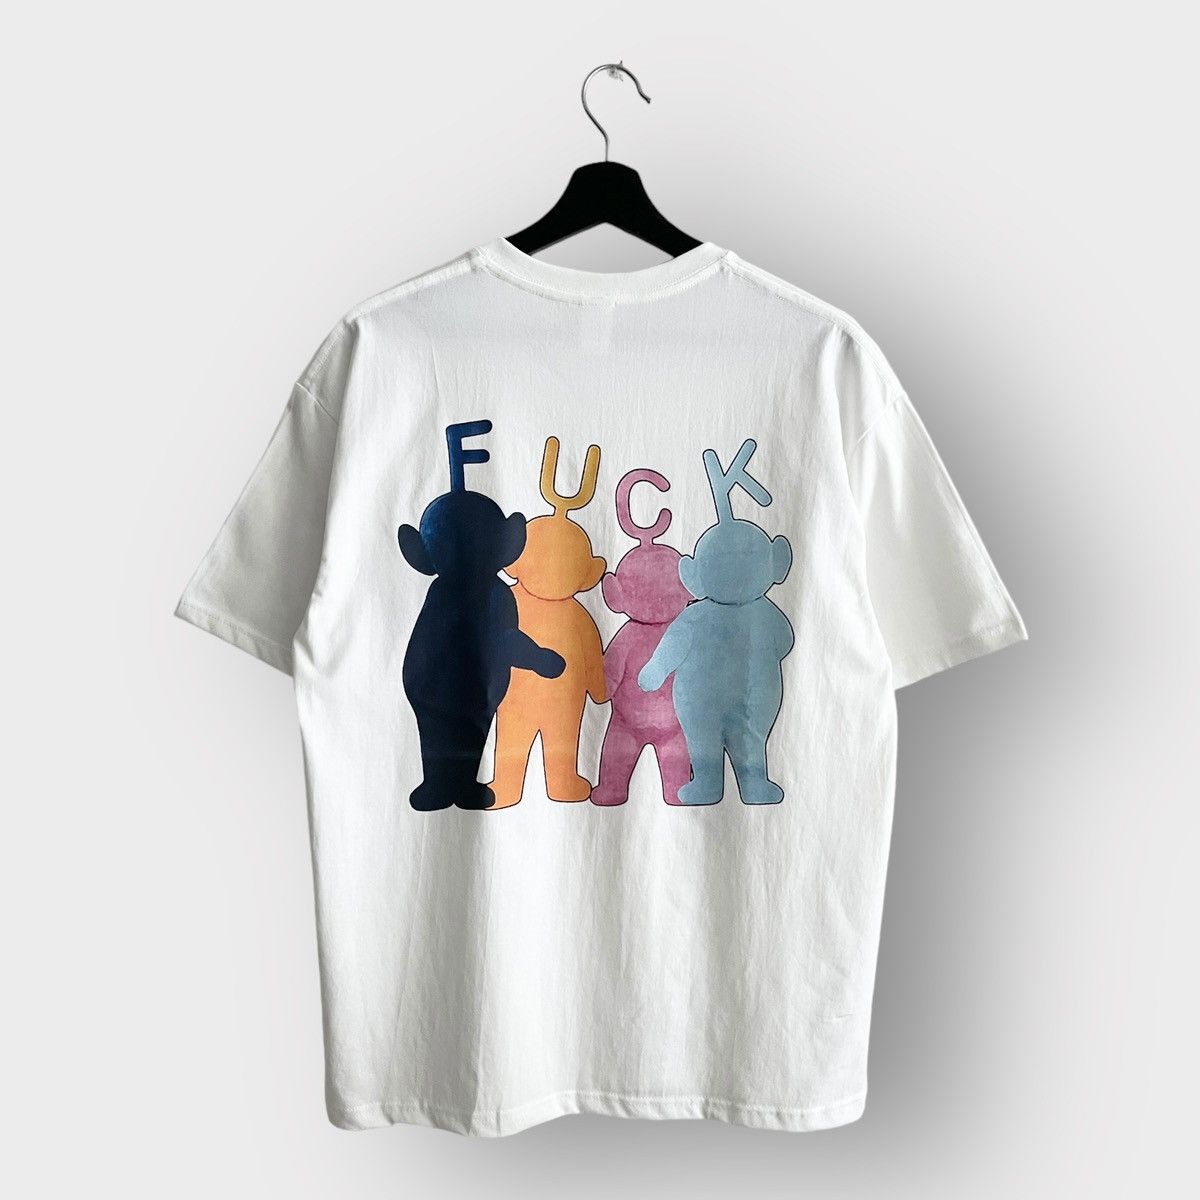 Humor - STEAL! 2000s Teletubbies FUCK Family Characters Tee (L) - 3